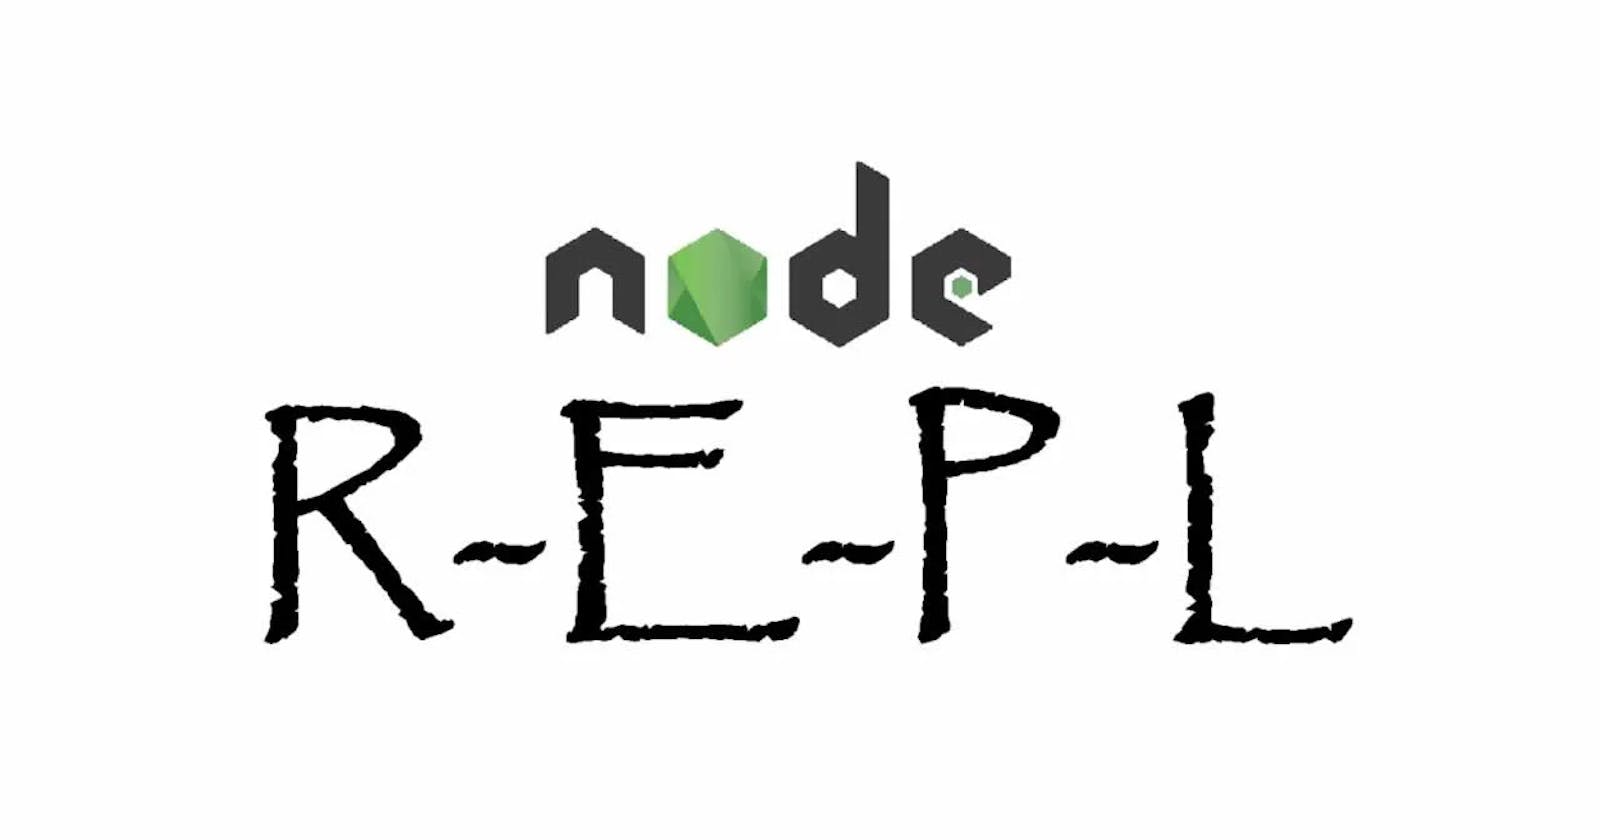 Getting started with The Node.js REPL